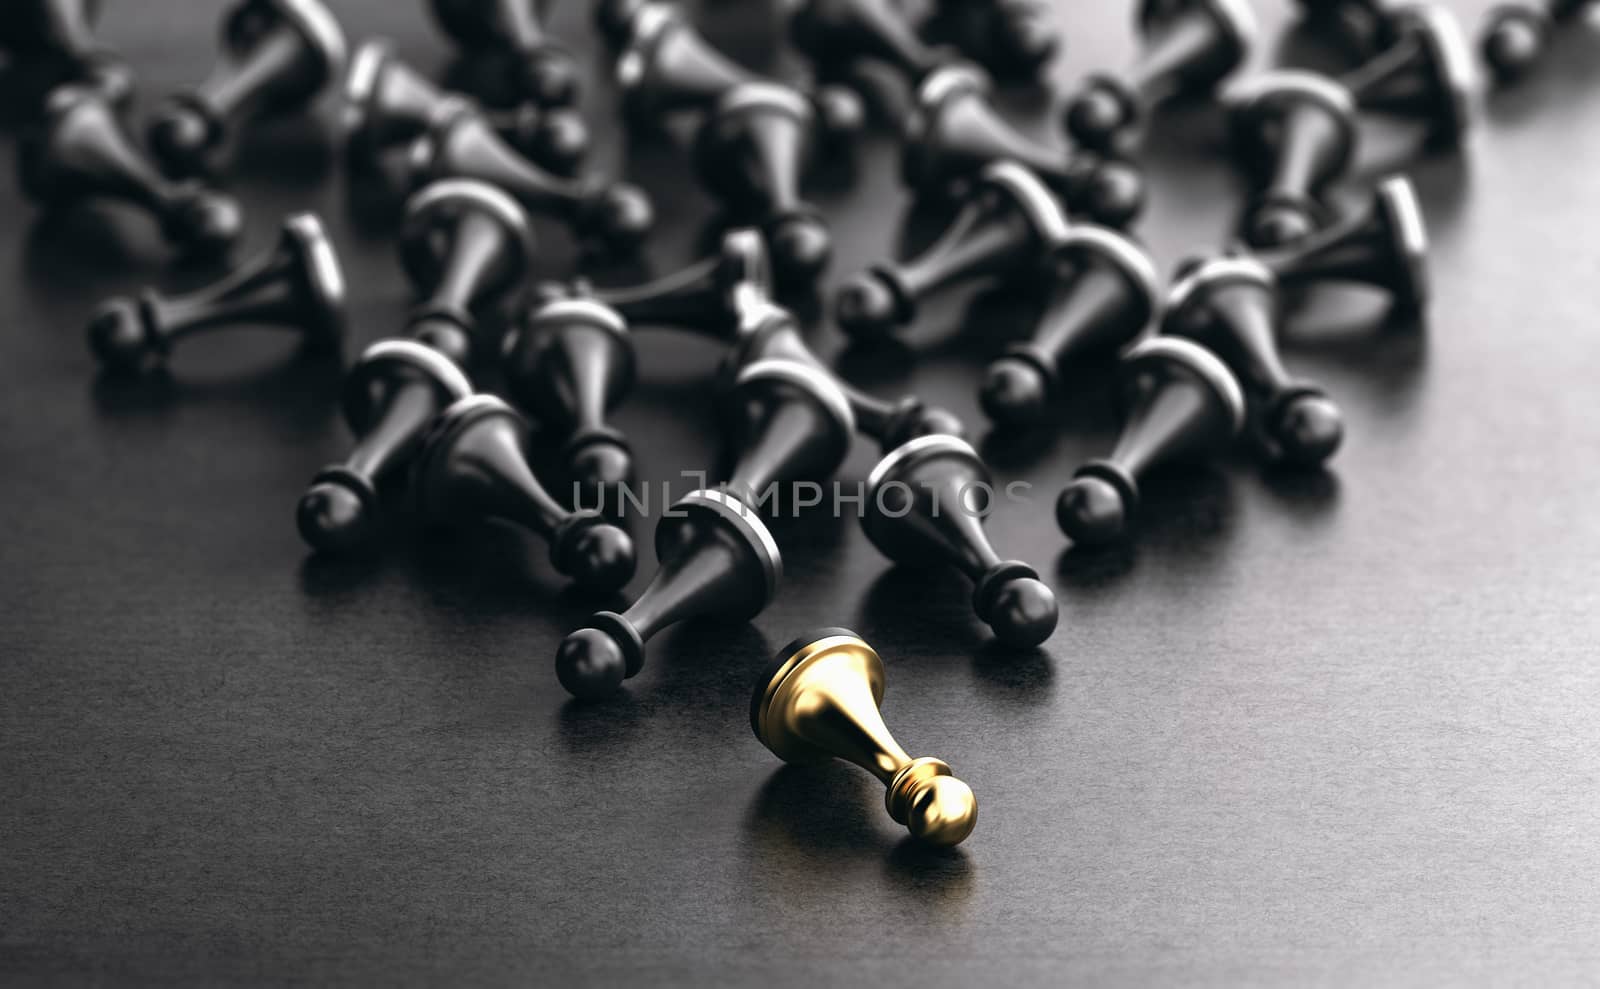 3D illustration of fallen pawns over black background. Concept of key person disability and chain reaction.